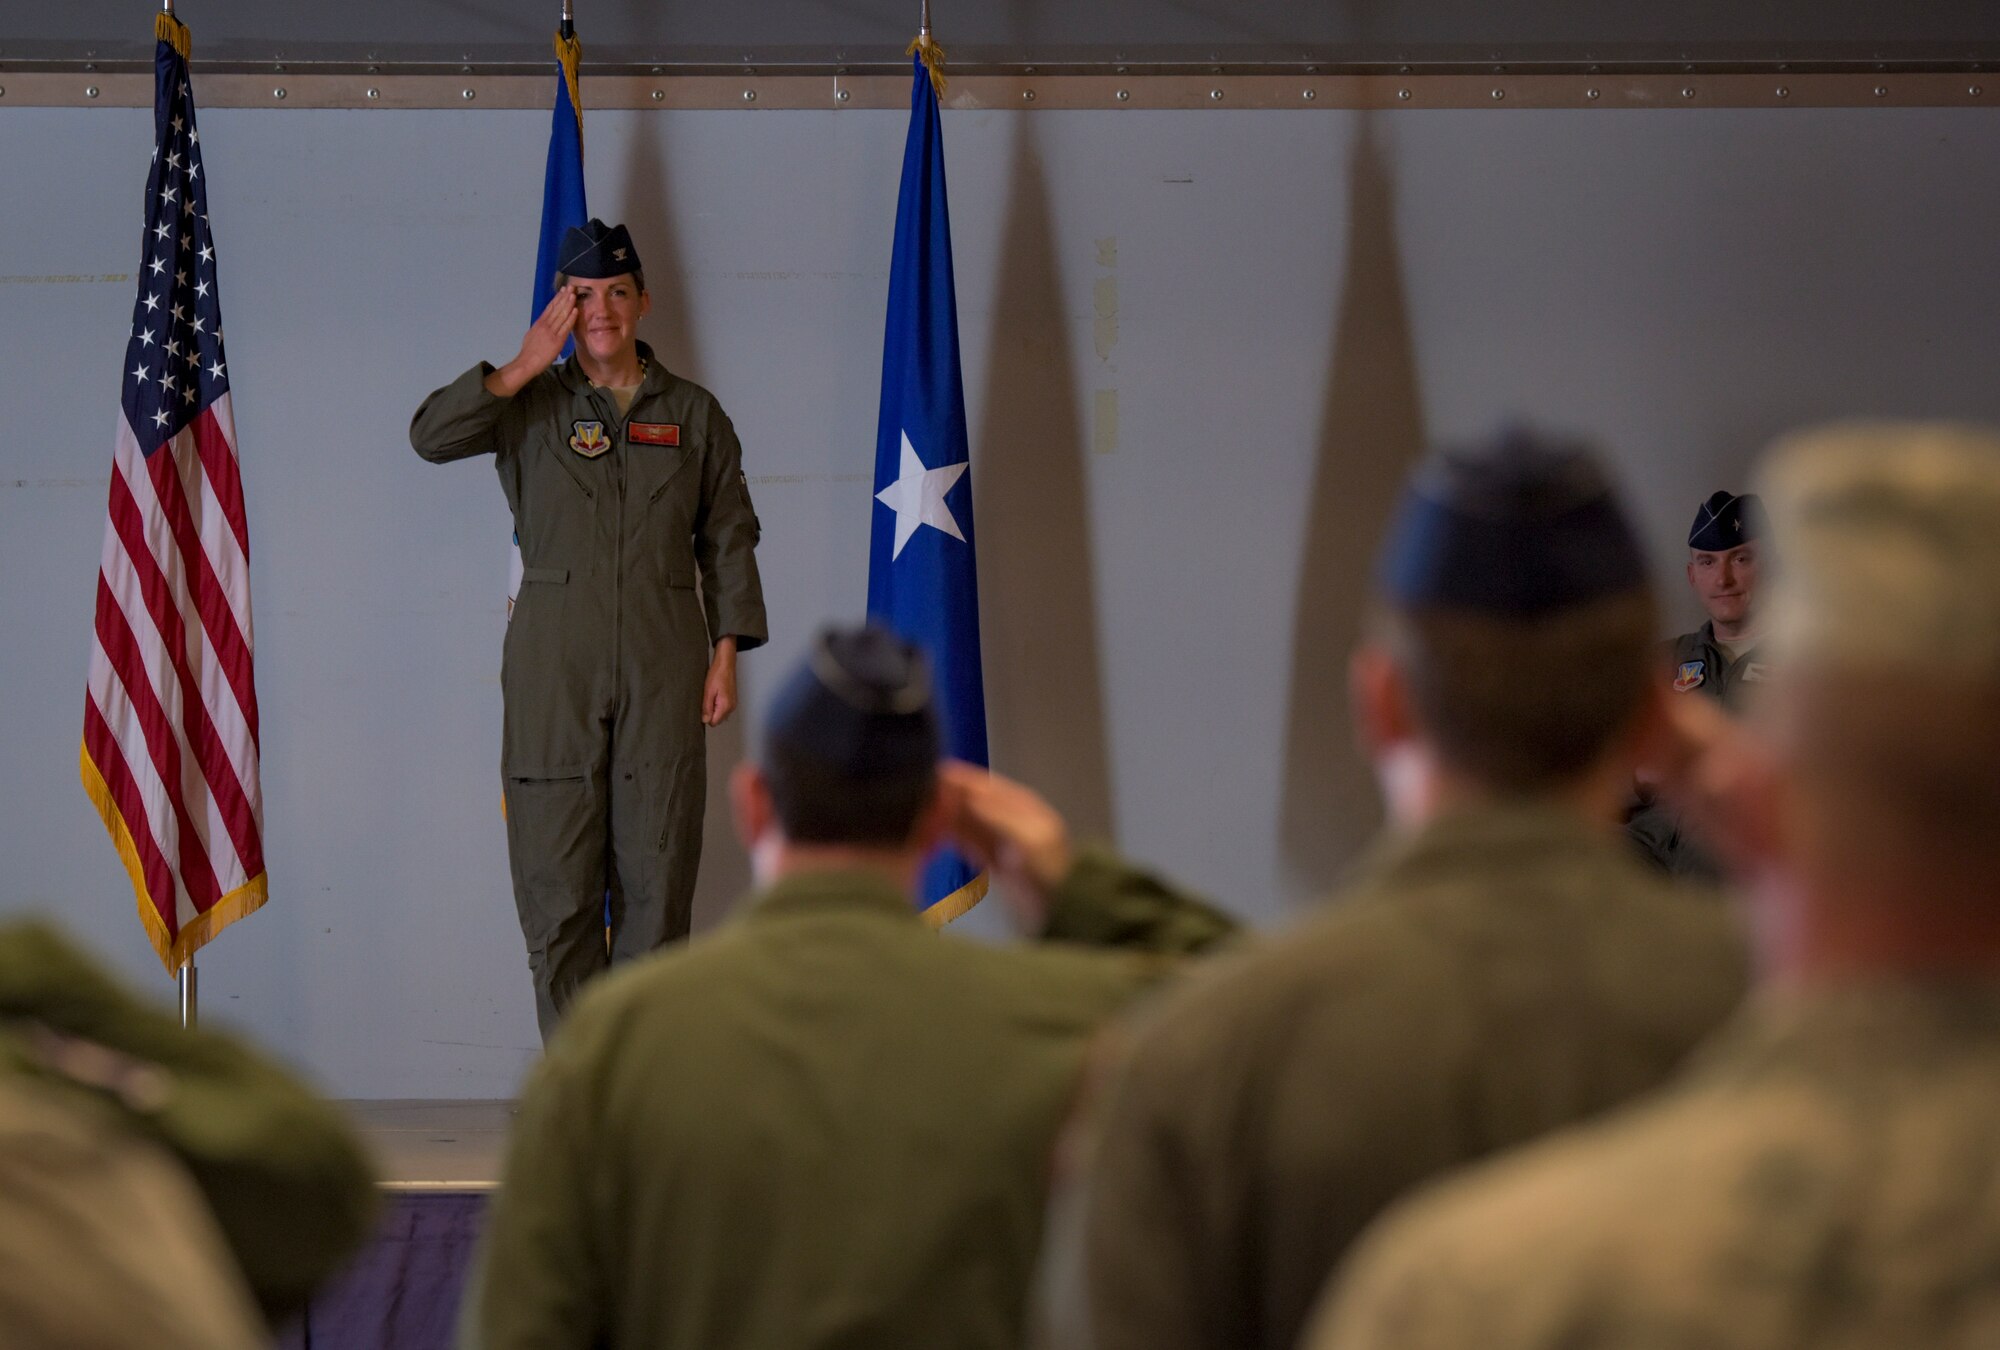 Col. Samantha Weeks, 57th Adversary Tactics Group outgoing commander, renders a final salute during a change of command ceremony at Nellis Air Force Base, Nevada, Aug. 3, 2018. Weeks was the 57th ATG commander for nearly two years. (U.S. Air Force photo by Airman 1st Class Andrew D. Sarver)